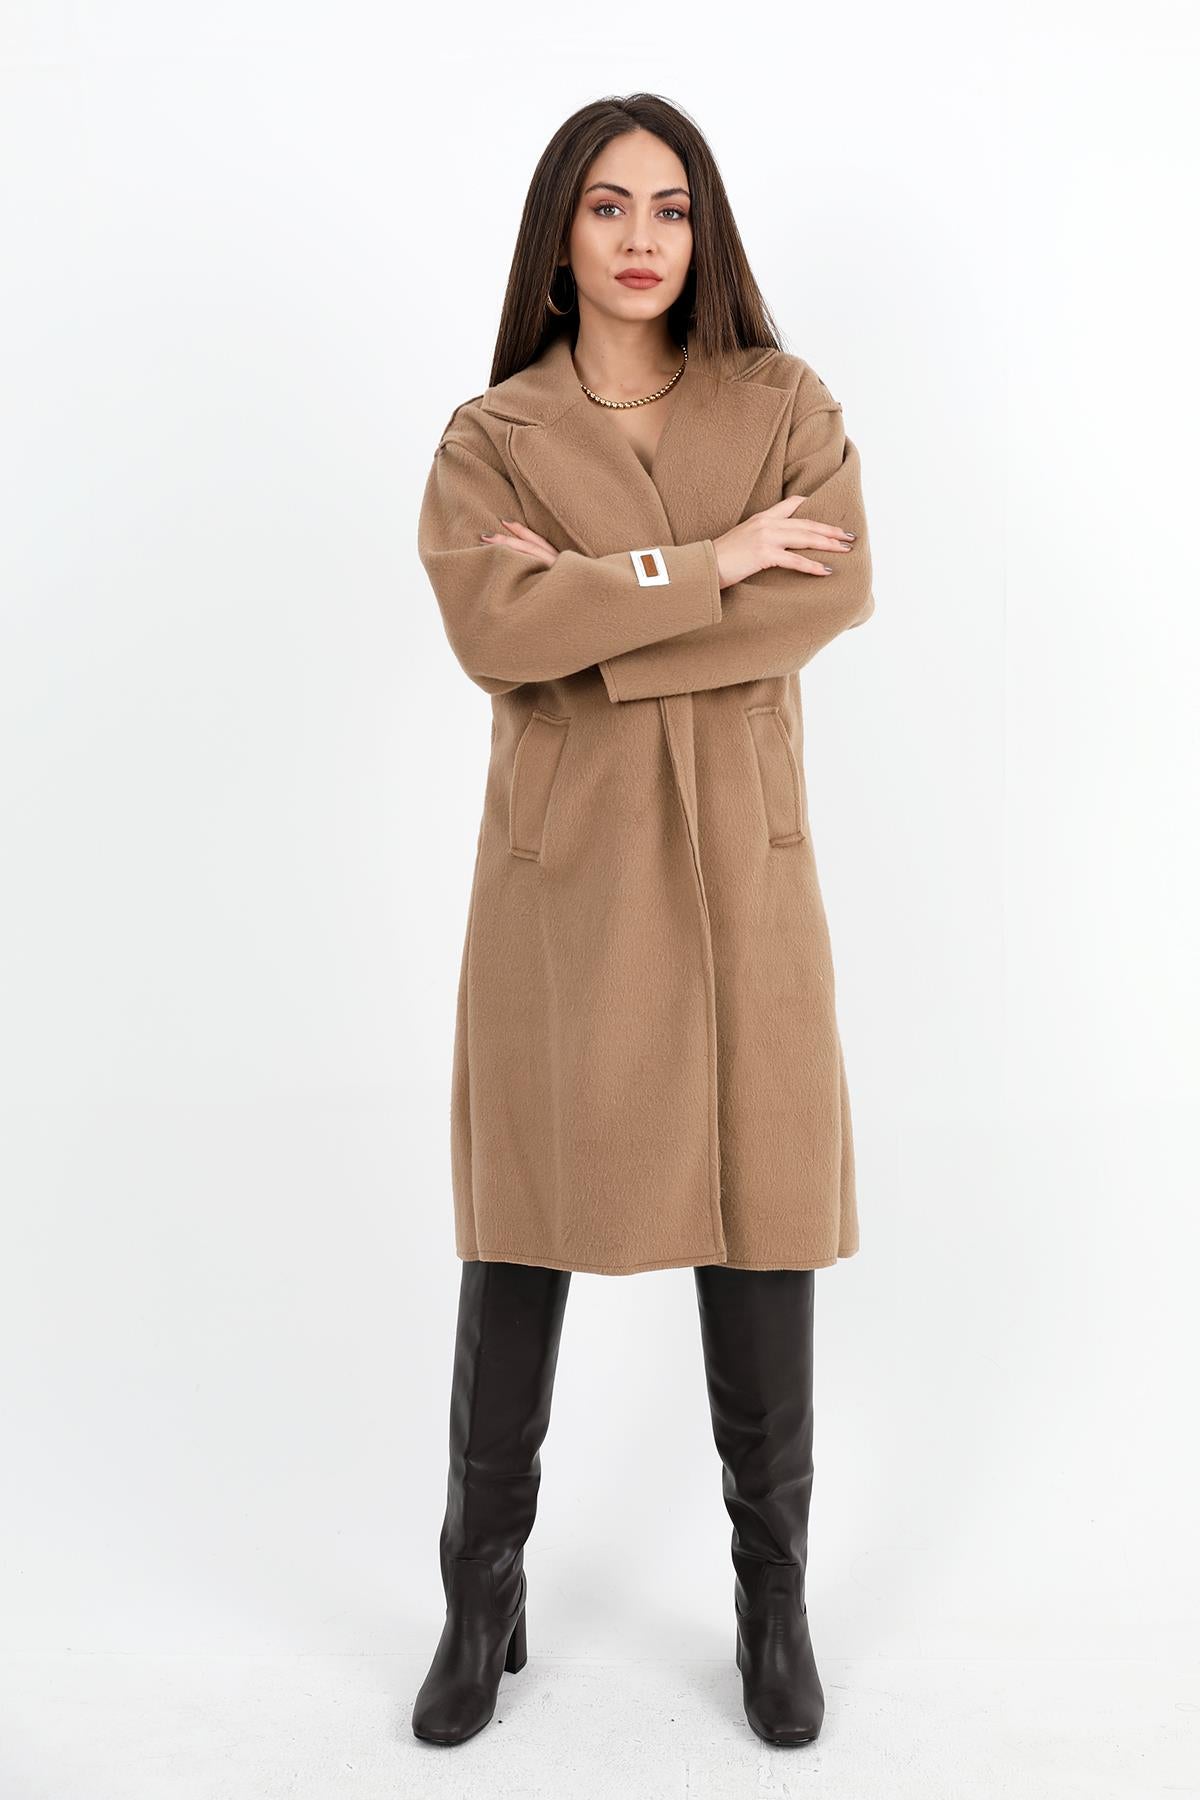 Women's Cashmere Coat Double Breasted Collar Sleeve with Emblem Detail - Camel - STREETMODE ™